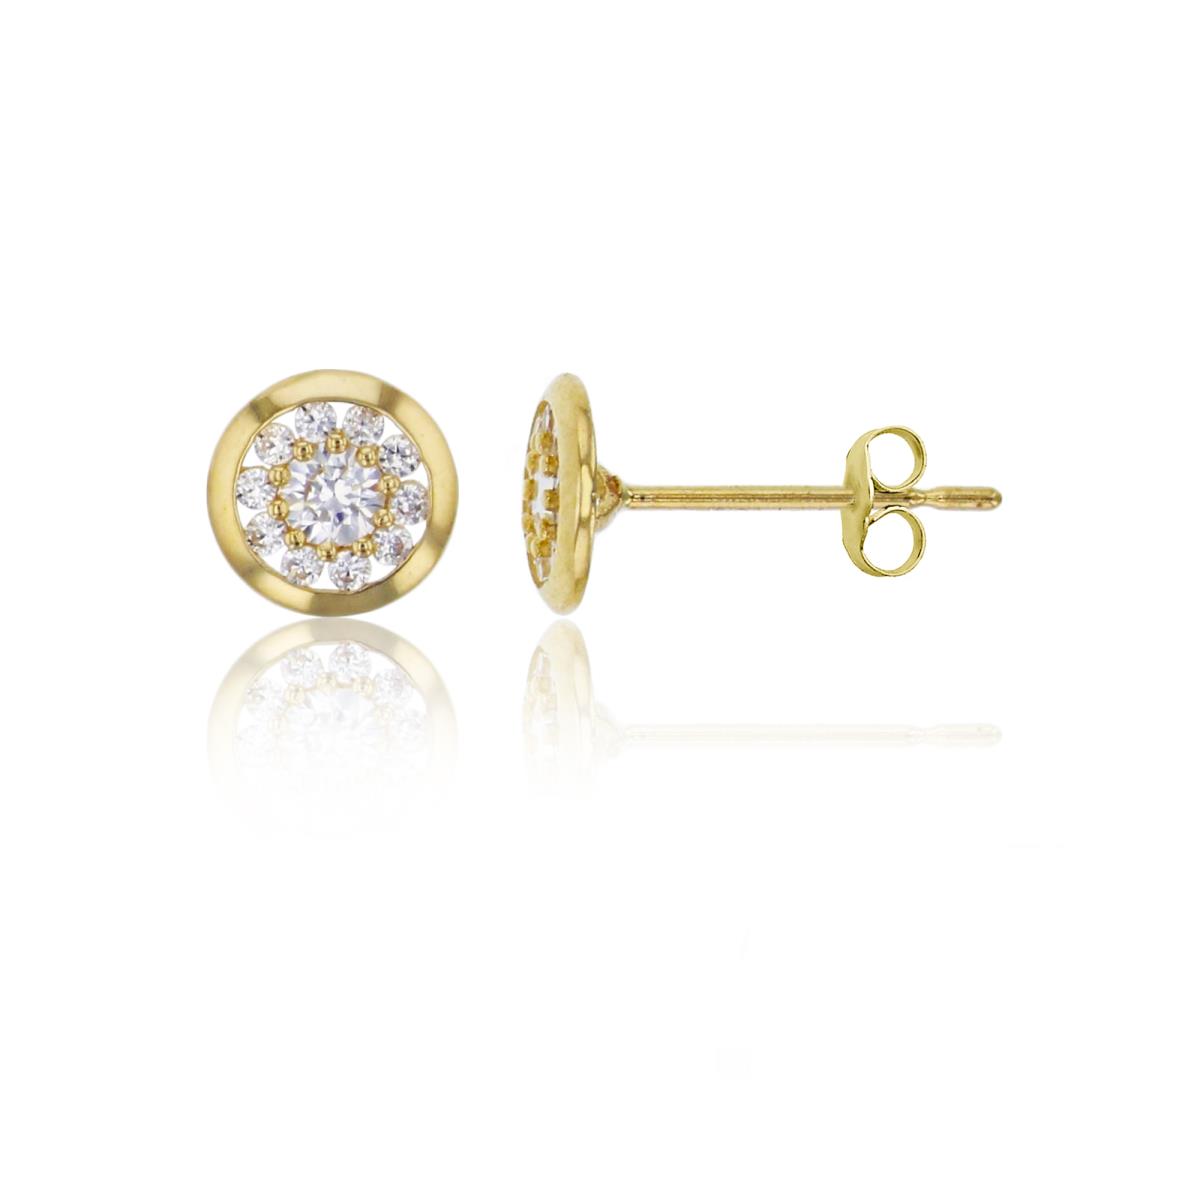 14K Yellow Gold 6x6mm Pave Circle Stud Earring with 14K Clutch